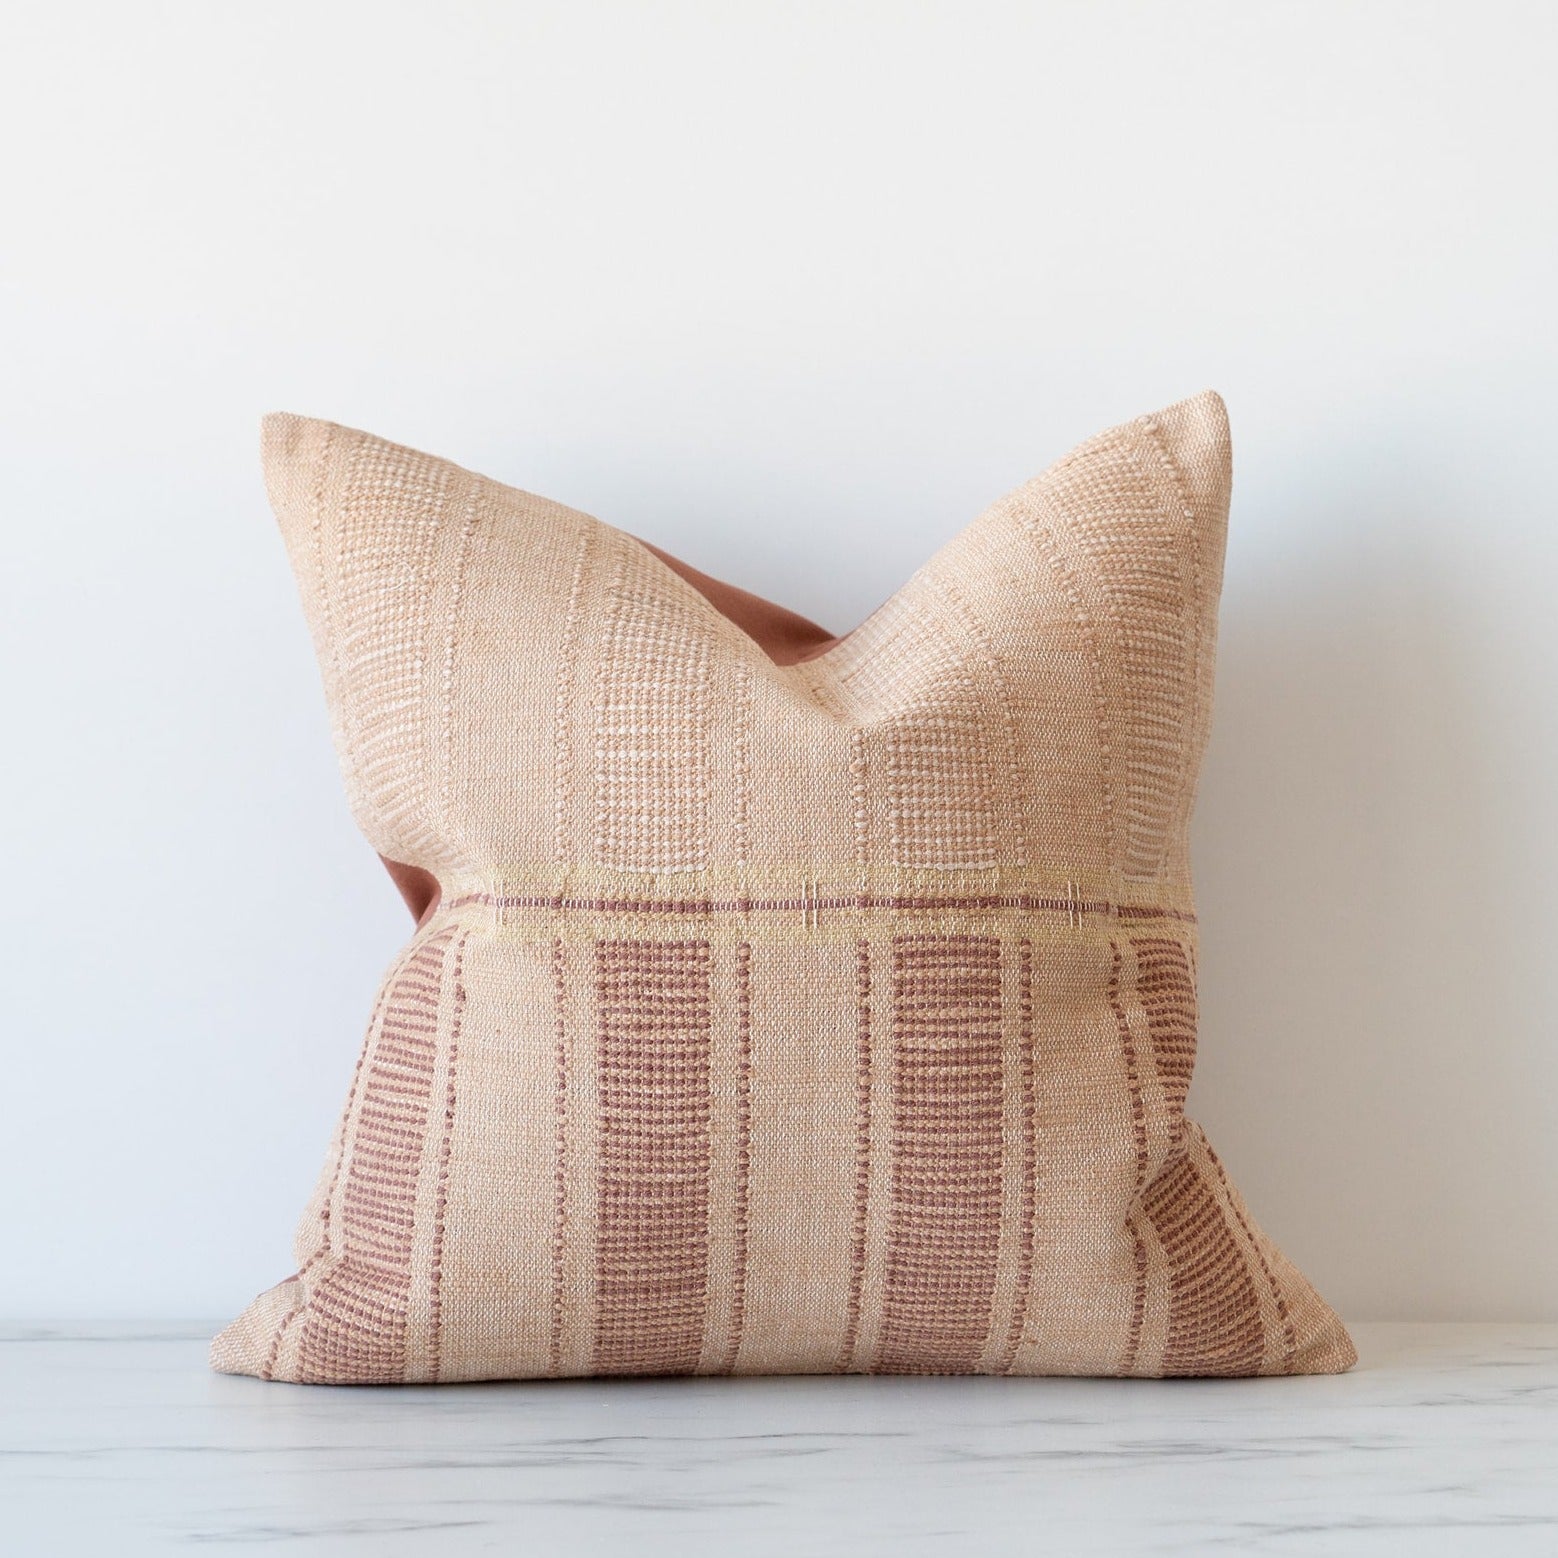 Textured woven pillow with tones of beige and rosy clay